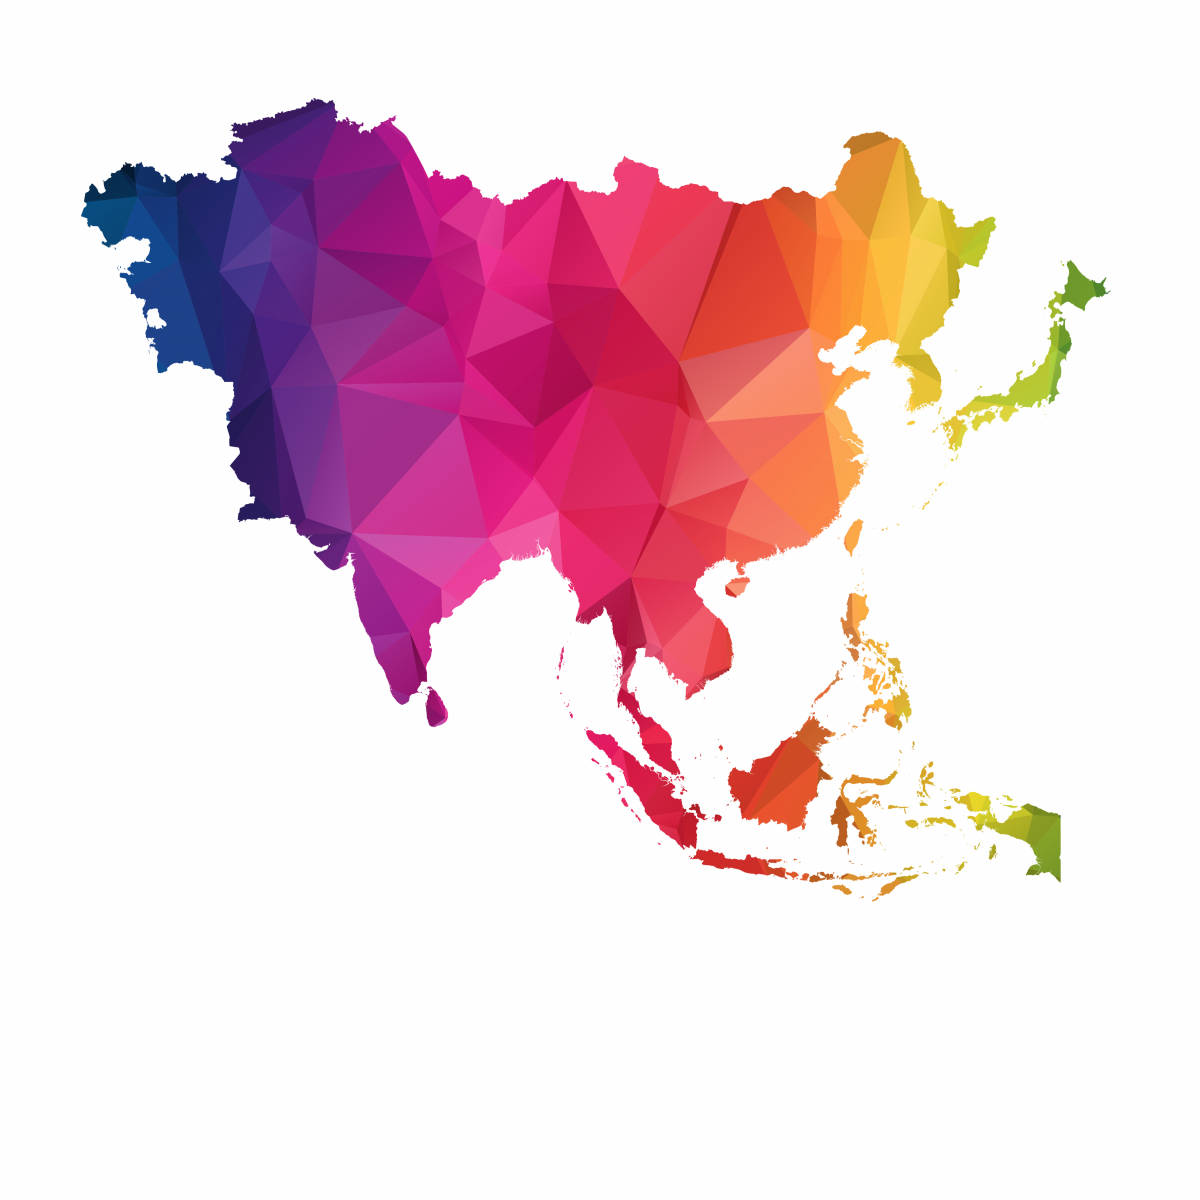 Aesthetic Colorful Asian Countries Map Wallpaper